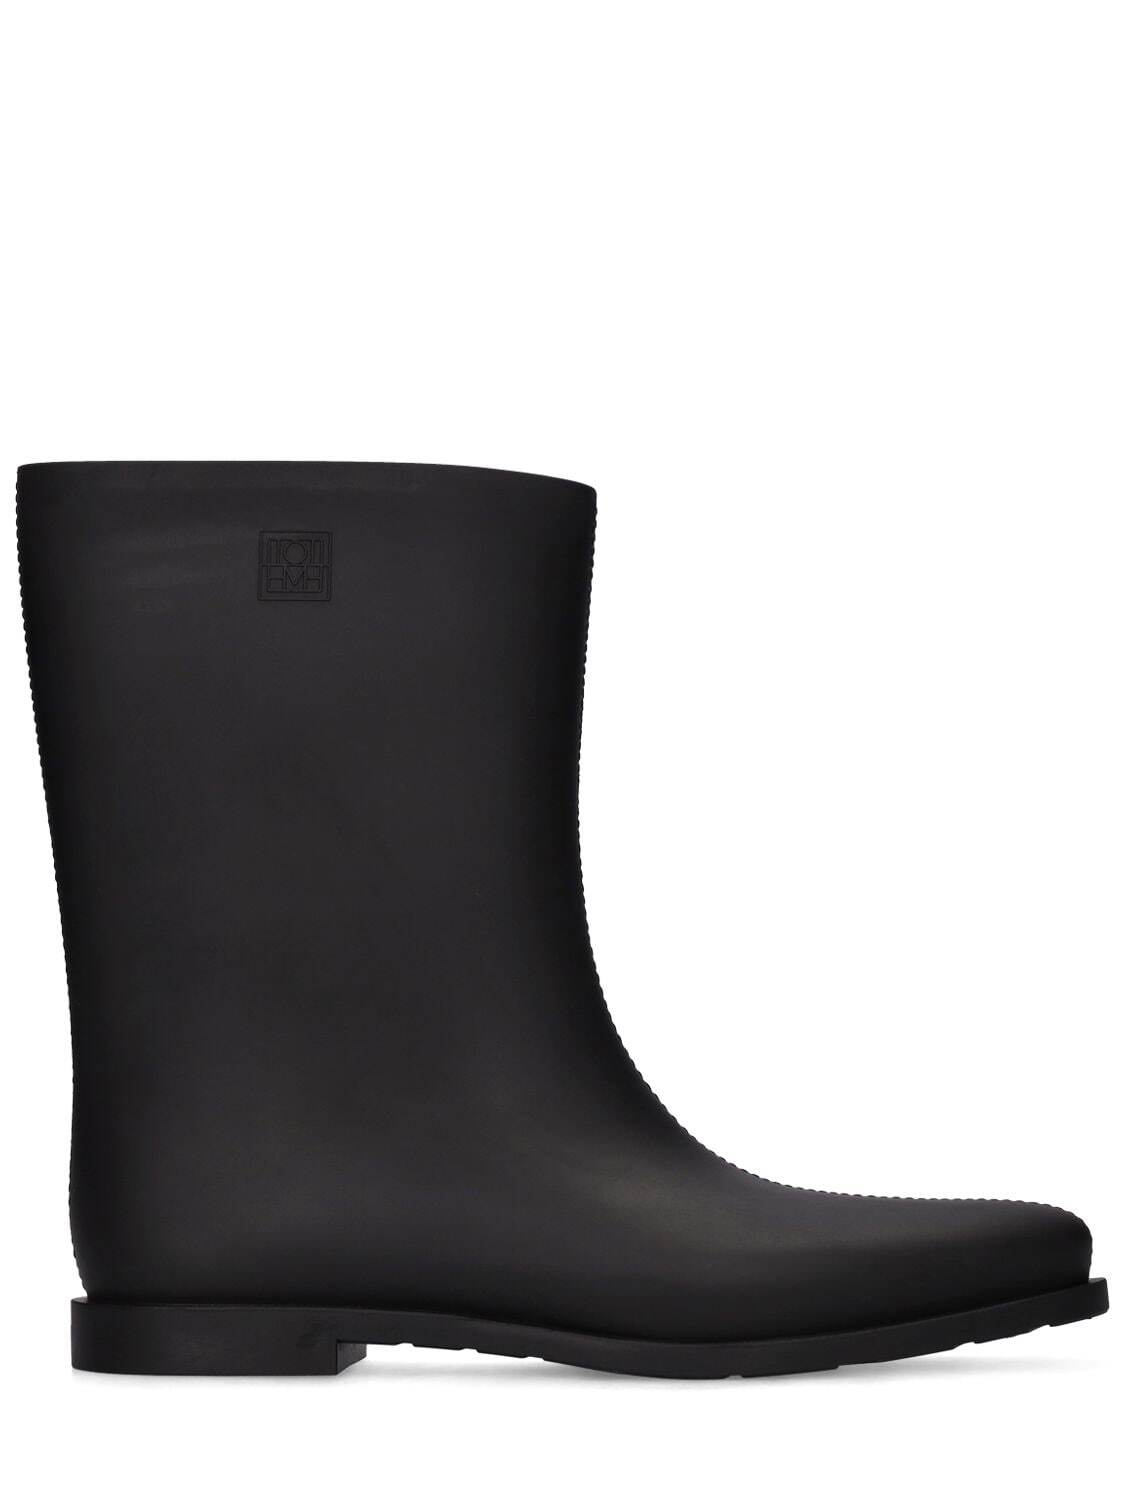 TOTEME 10mm The Rain Rubber Boots in black